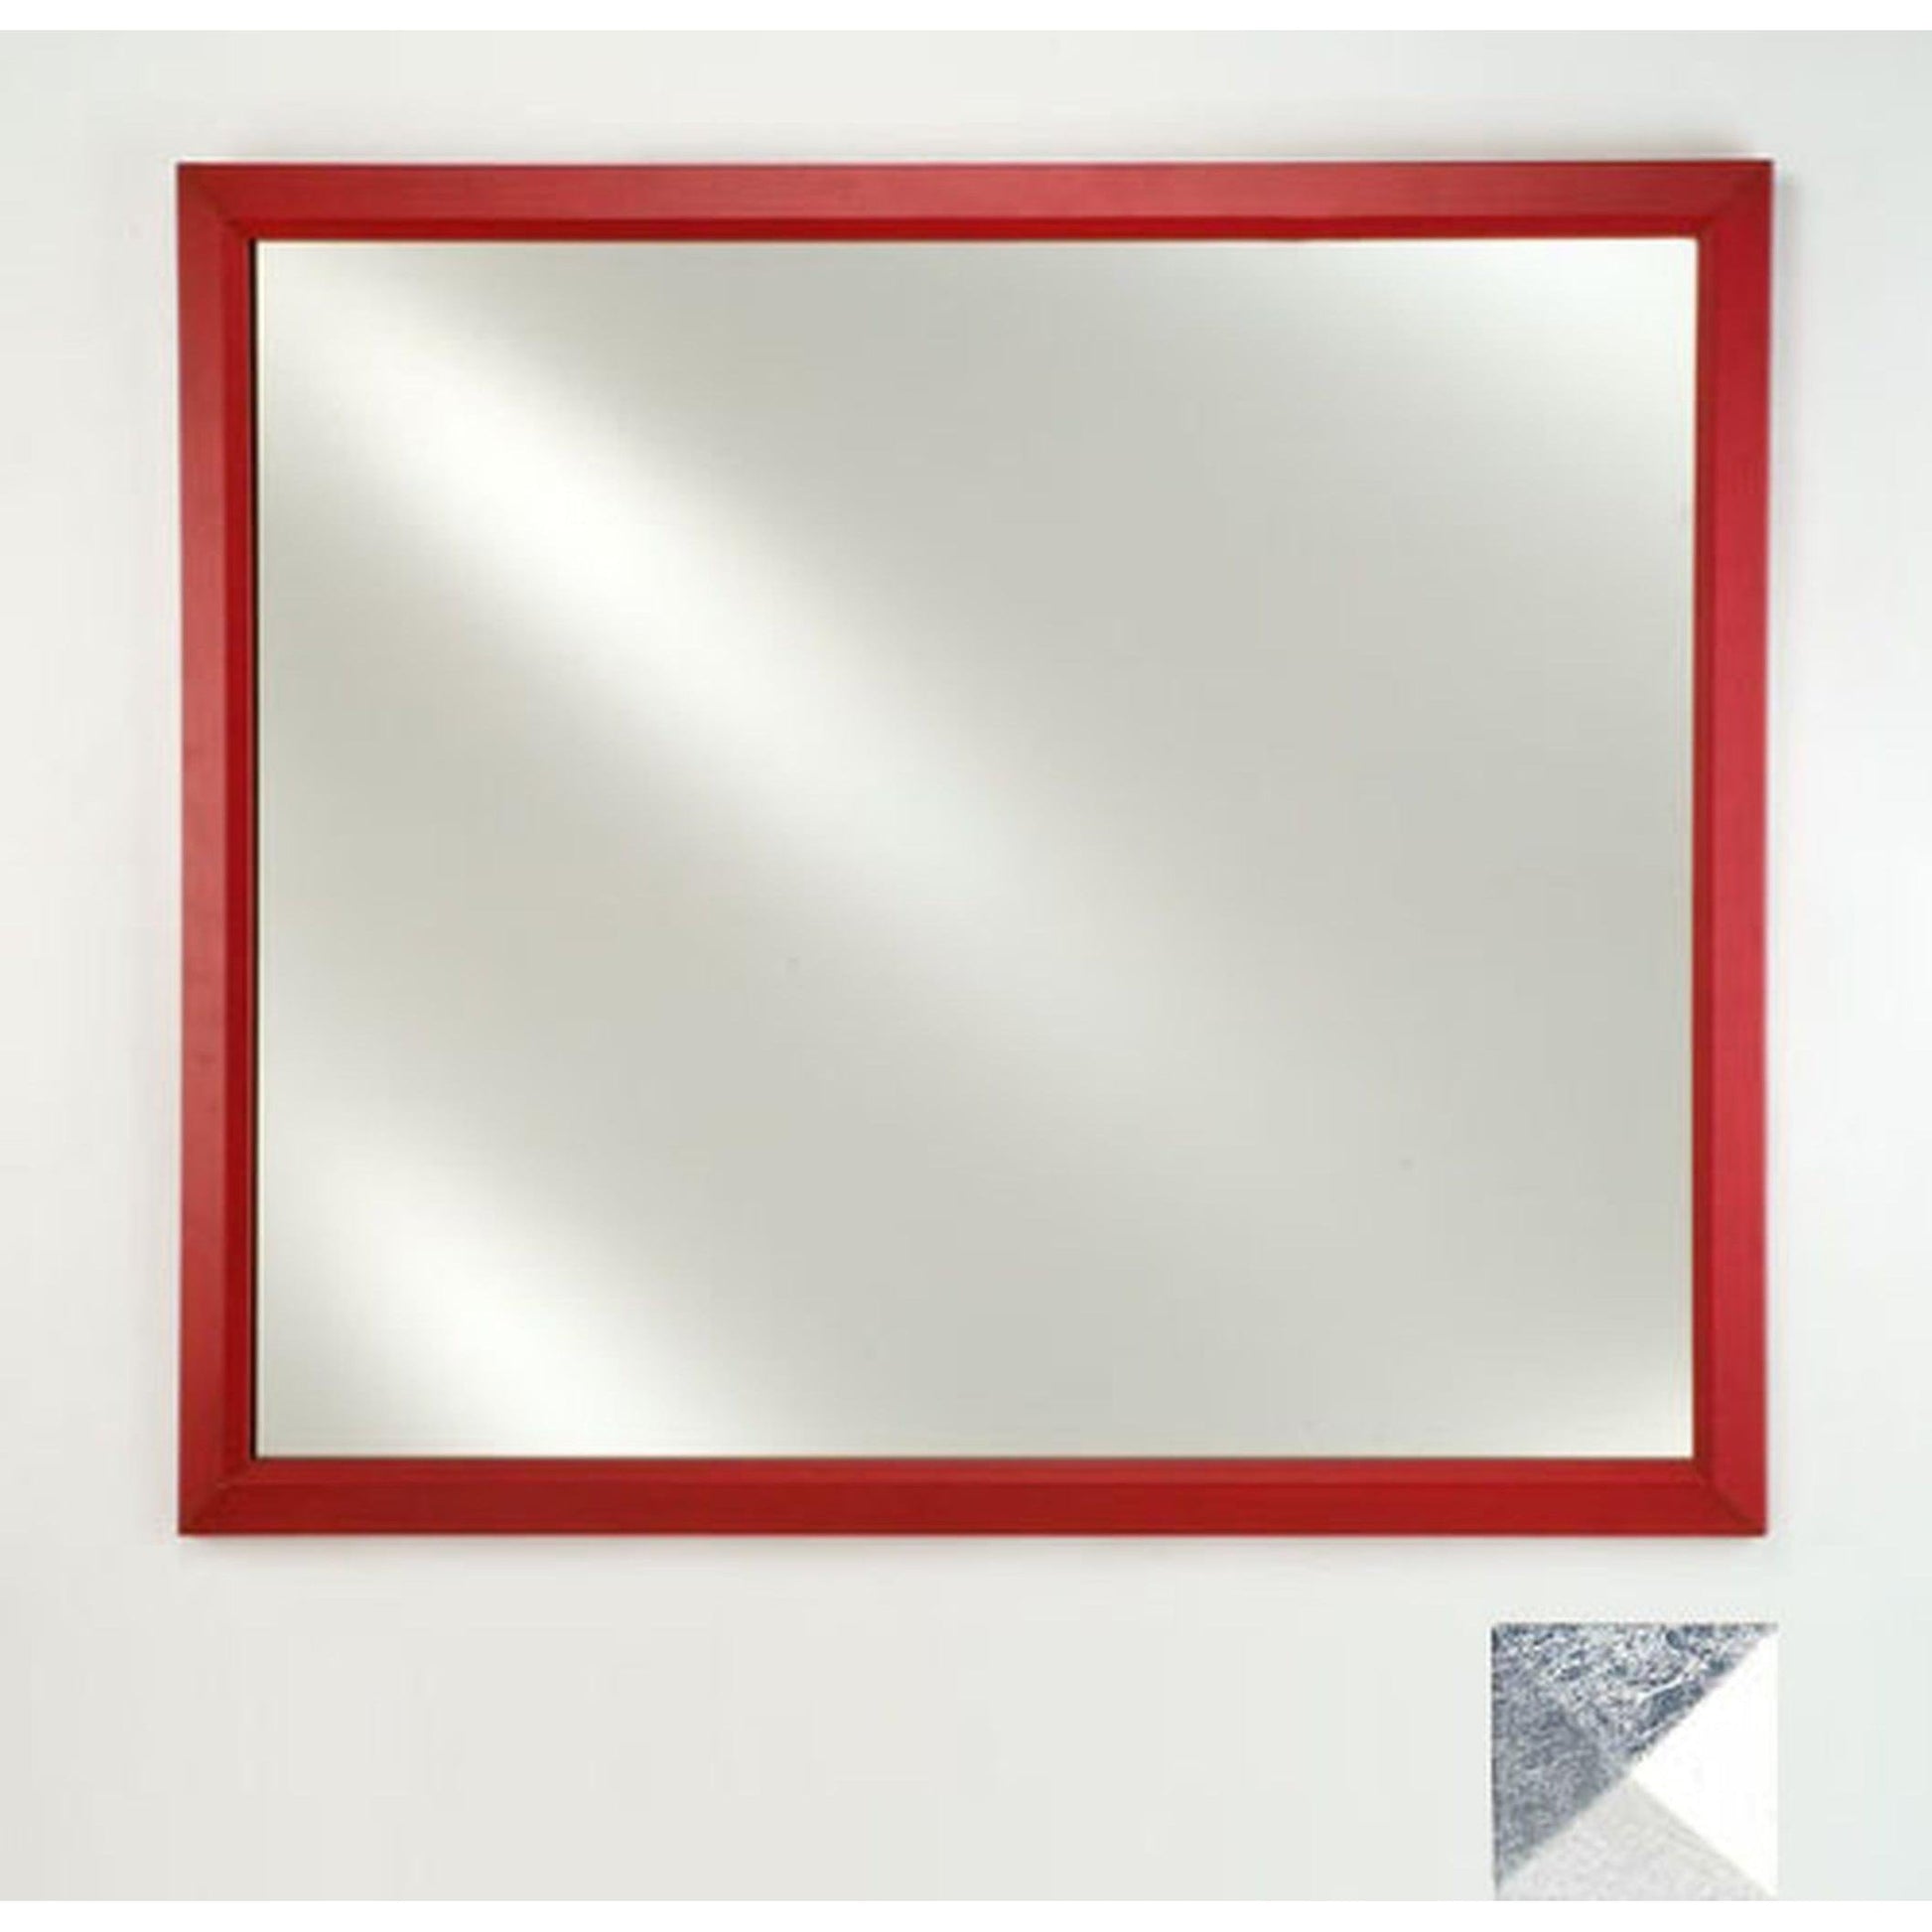 Afina Signature 20" x 26" Meridian Antique Silver With Antique Silver Caps Framed Mirror With Plain Edge